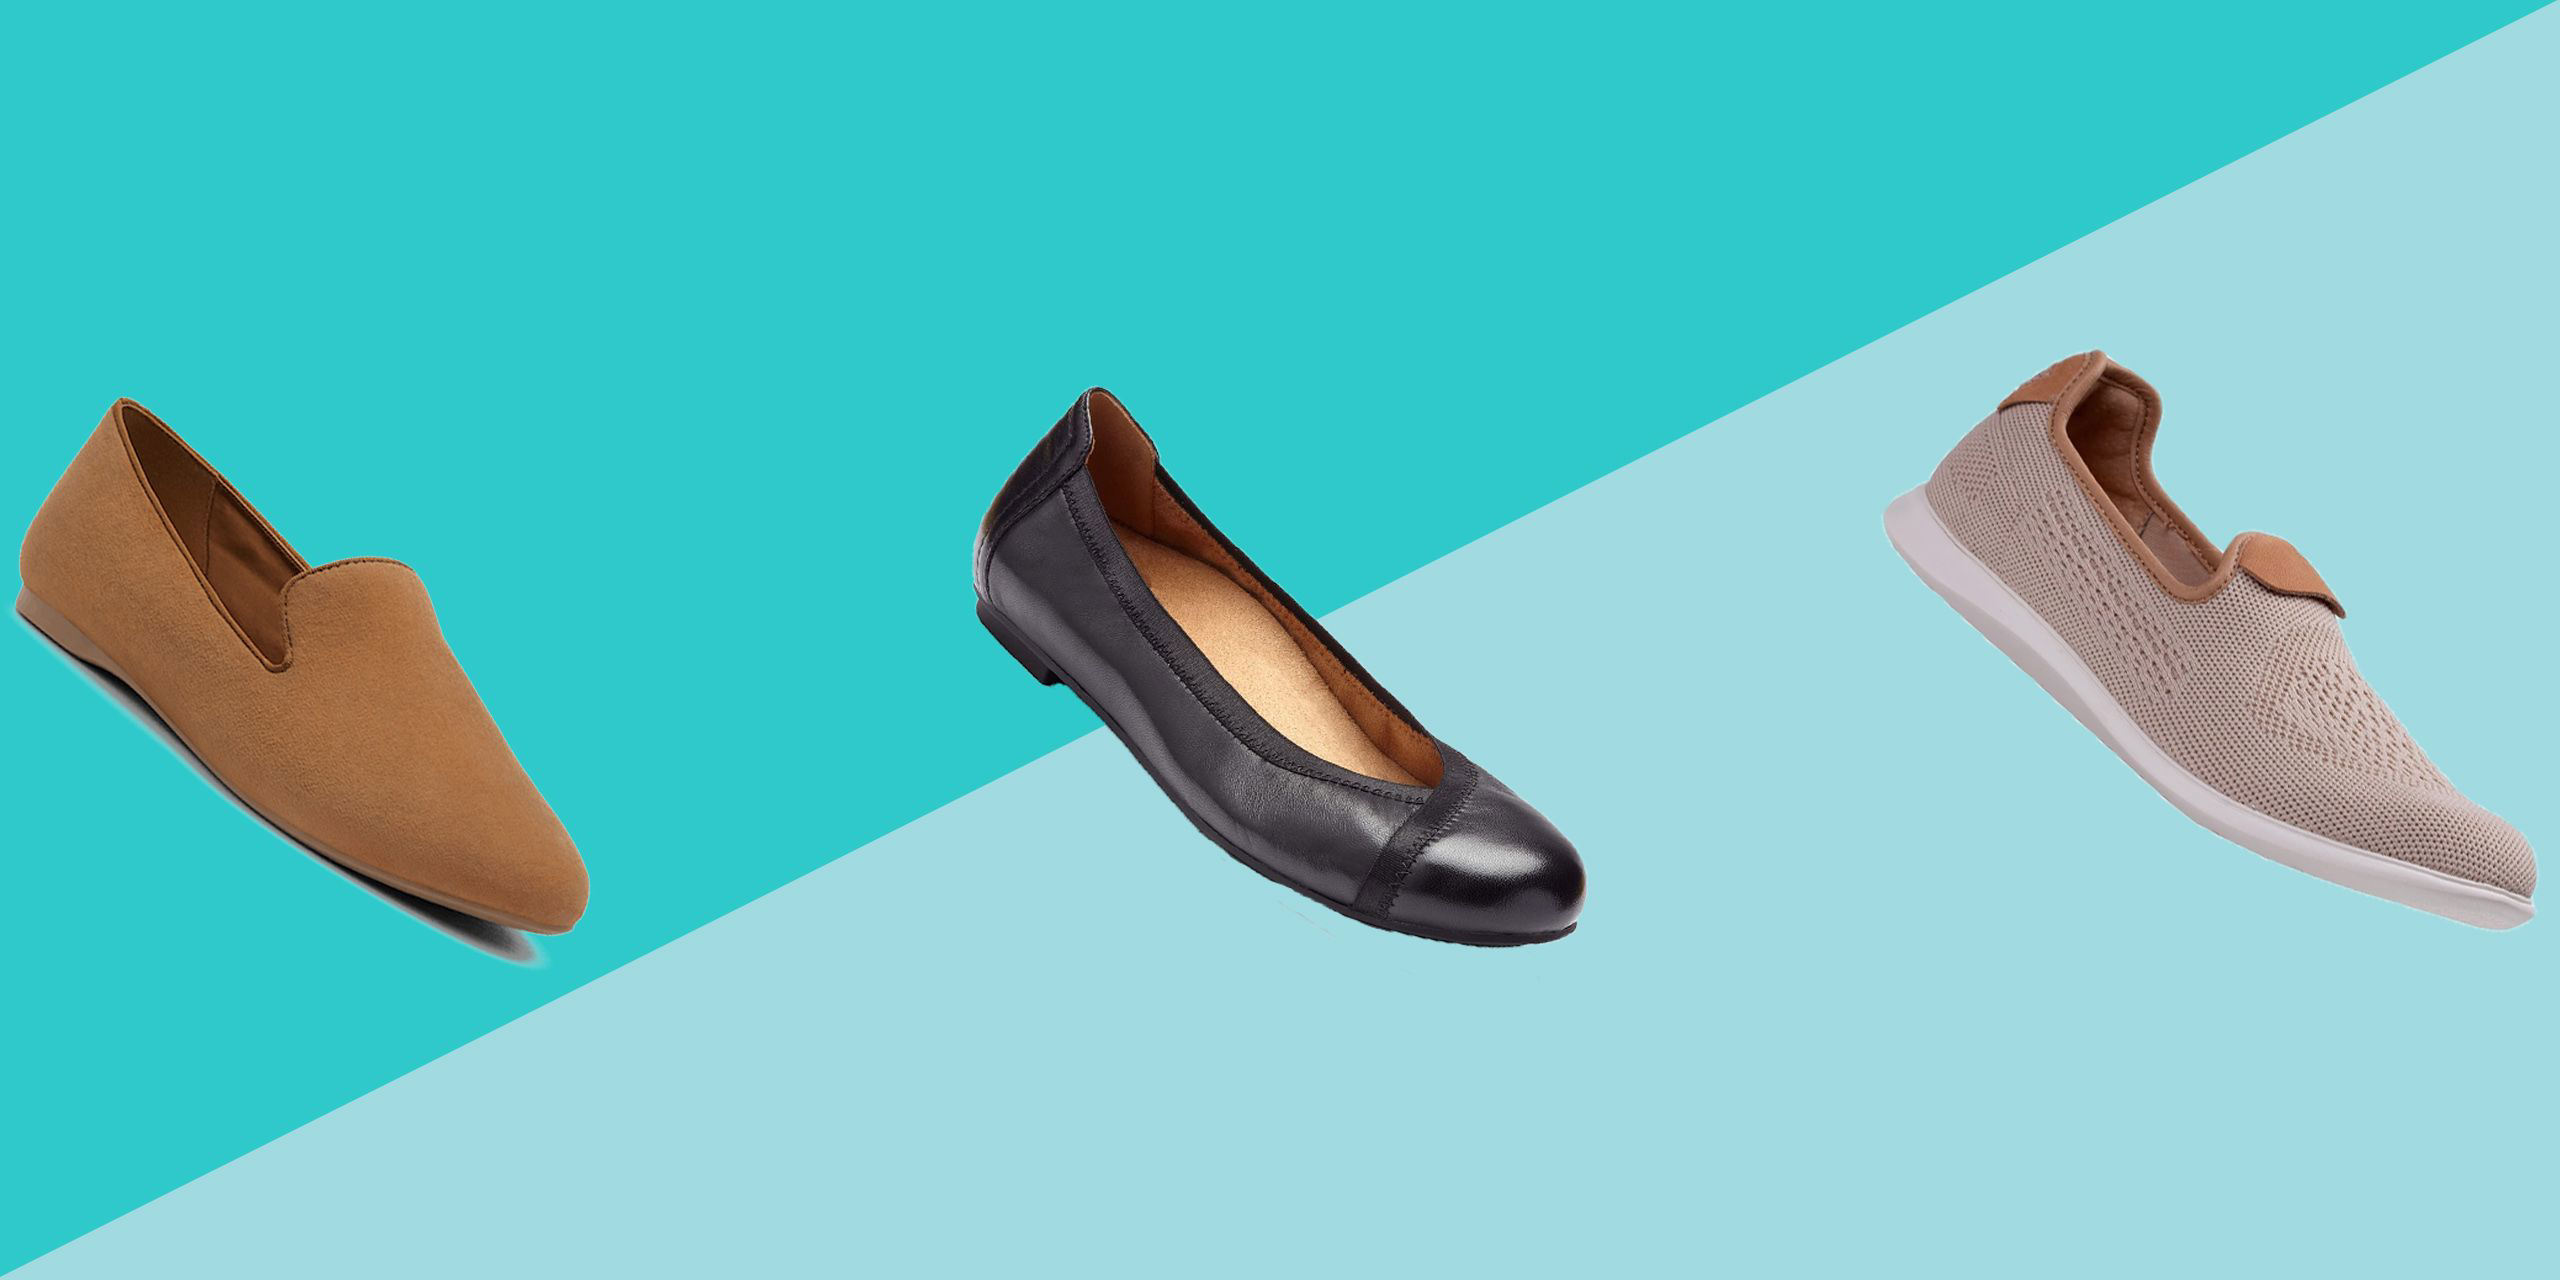 These Podiatrist- and Editor-Recommended Flats Are Beyond Comfortable